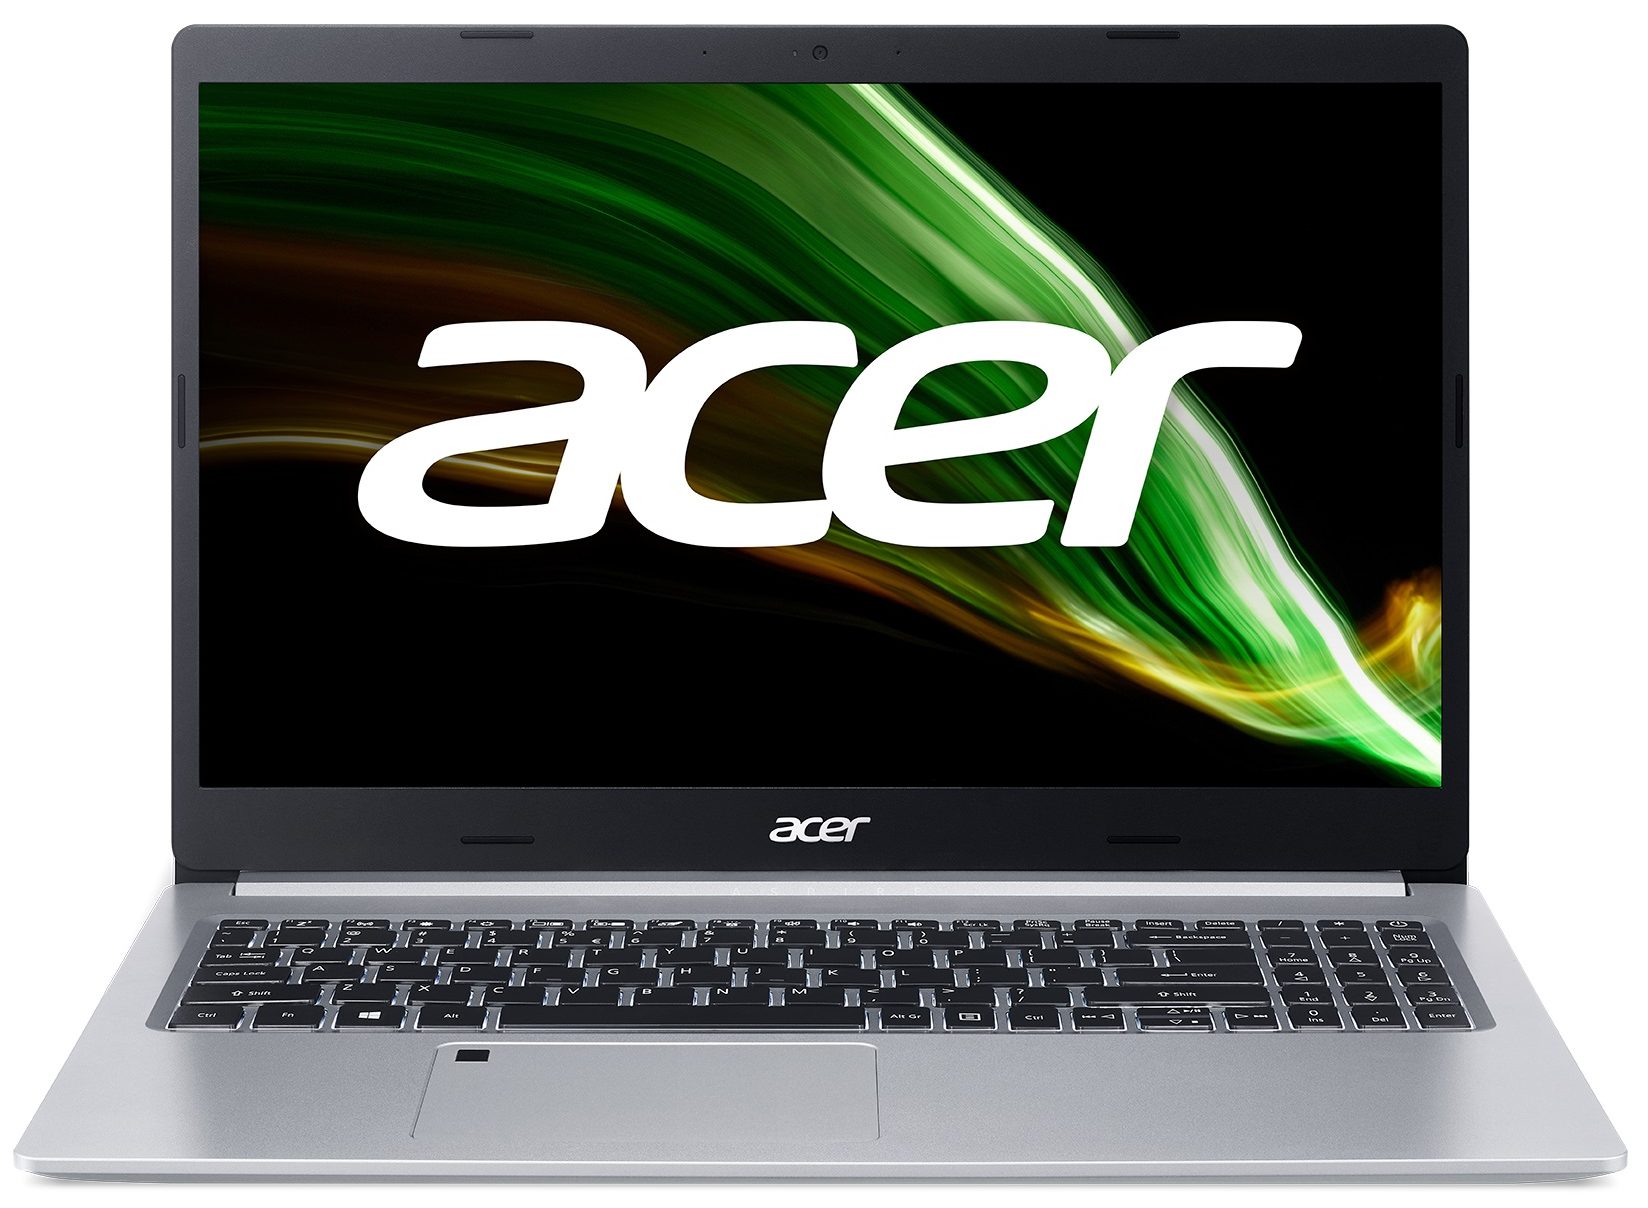 Acer Aspire 5 (A515-45 / A515-45G / A515-45S) - Specs, Tests, and